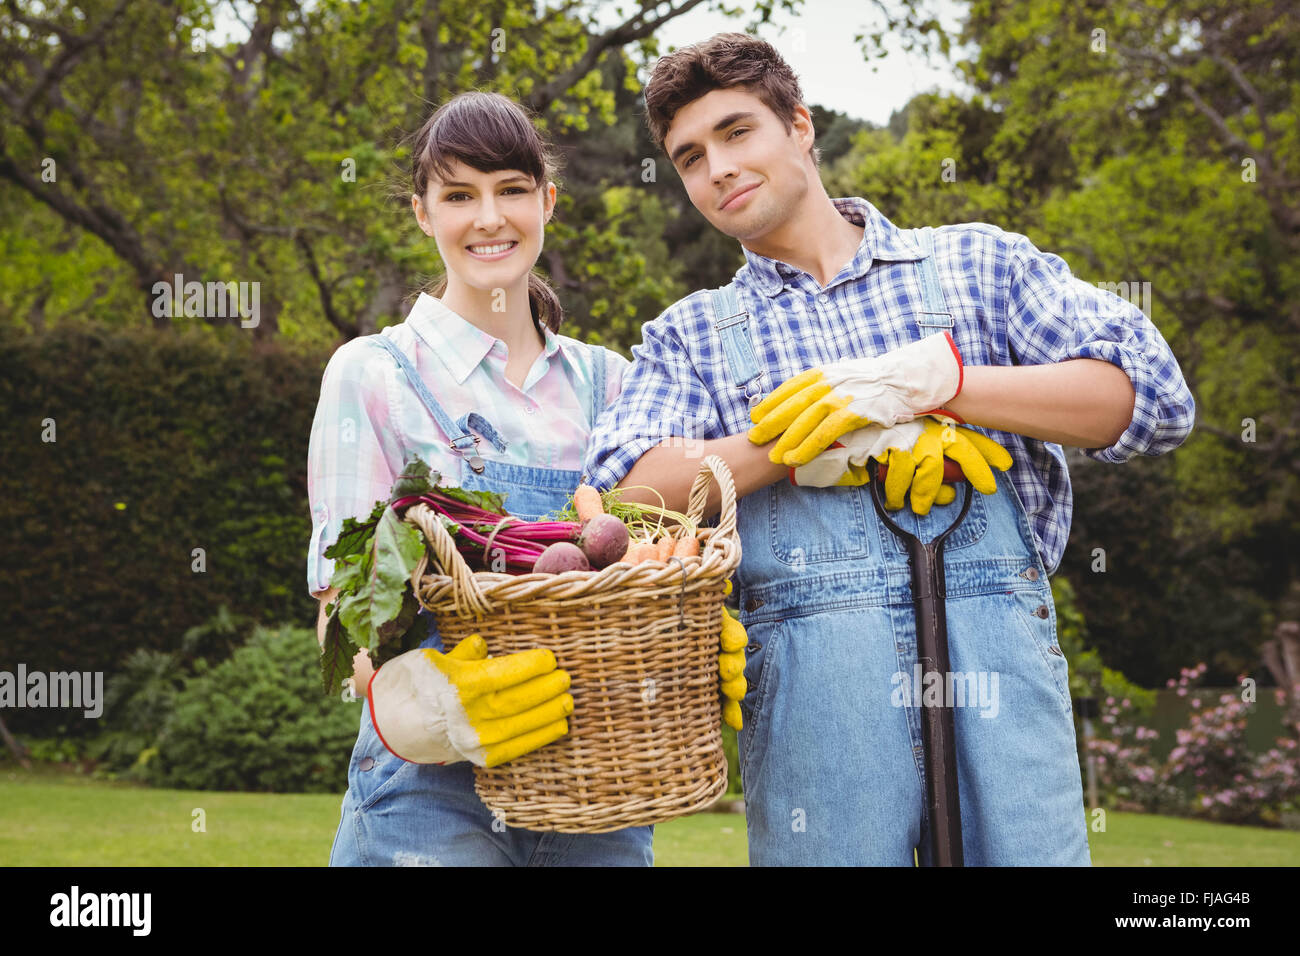 Young couple holding a basket of freshly harvested vegetables Stock Photo